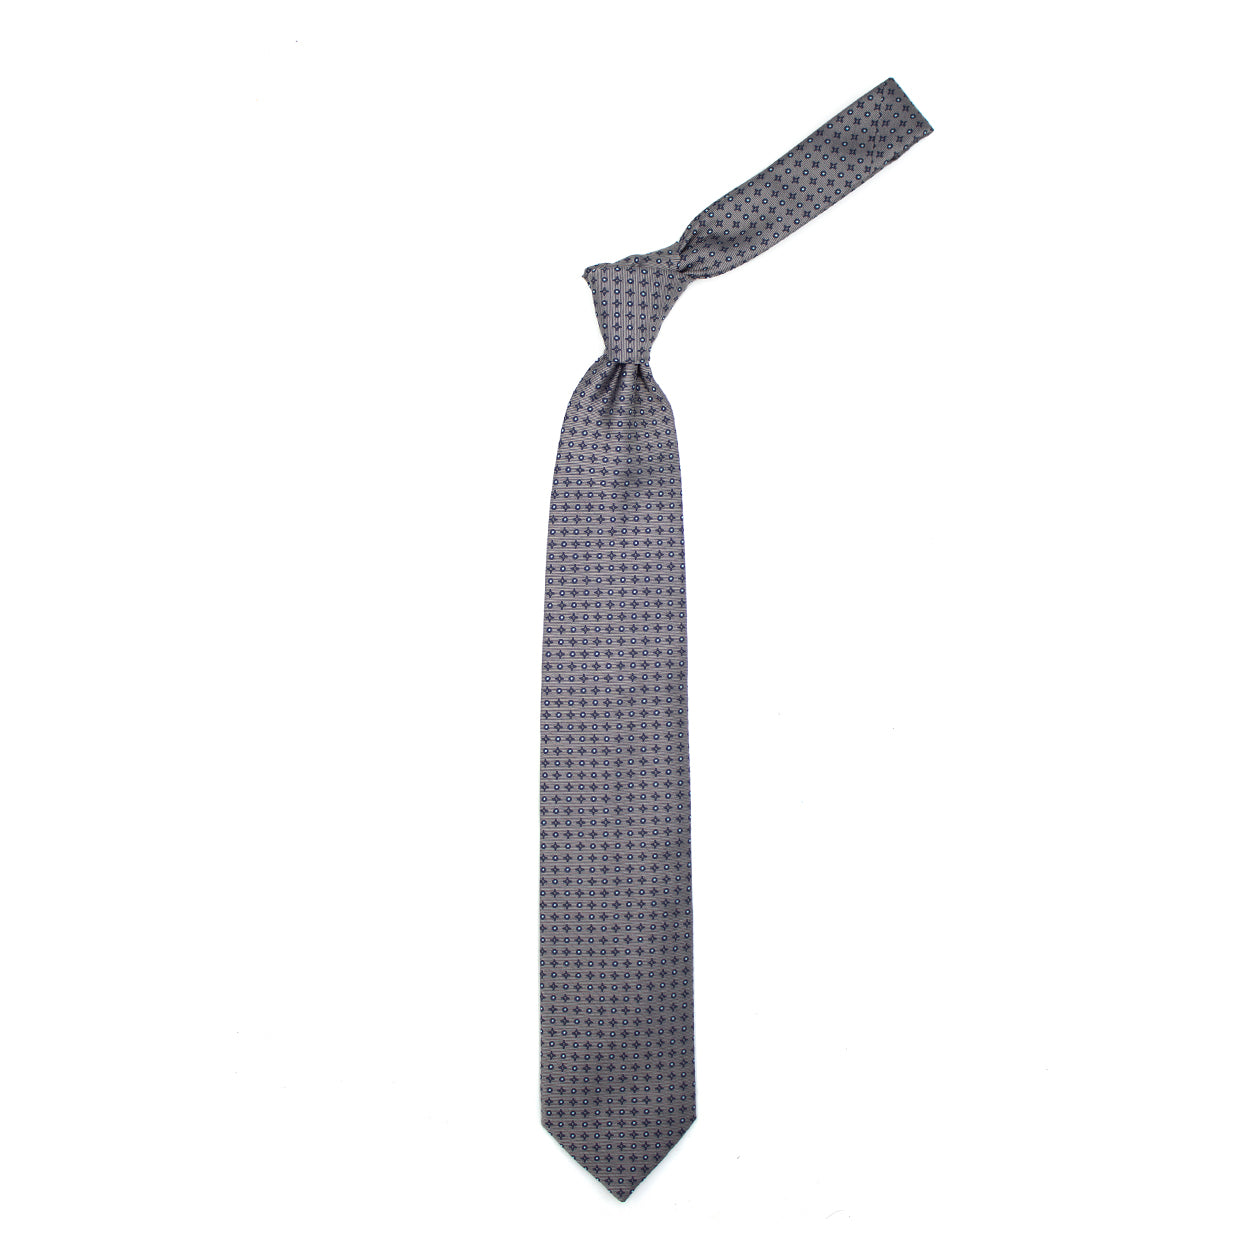 Grey tie with blue diamonds and circles and blue dots